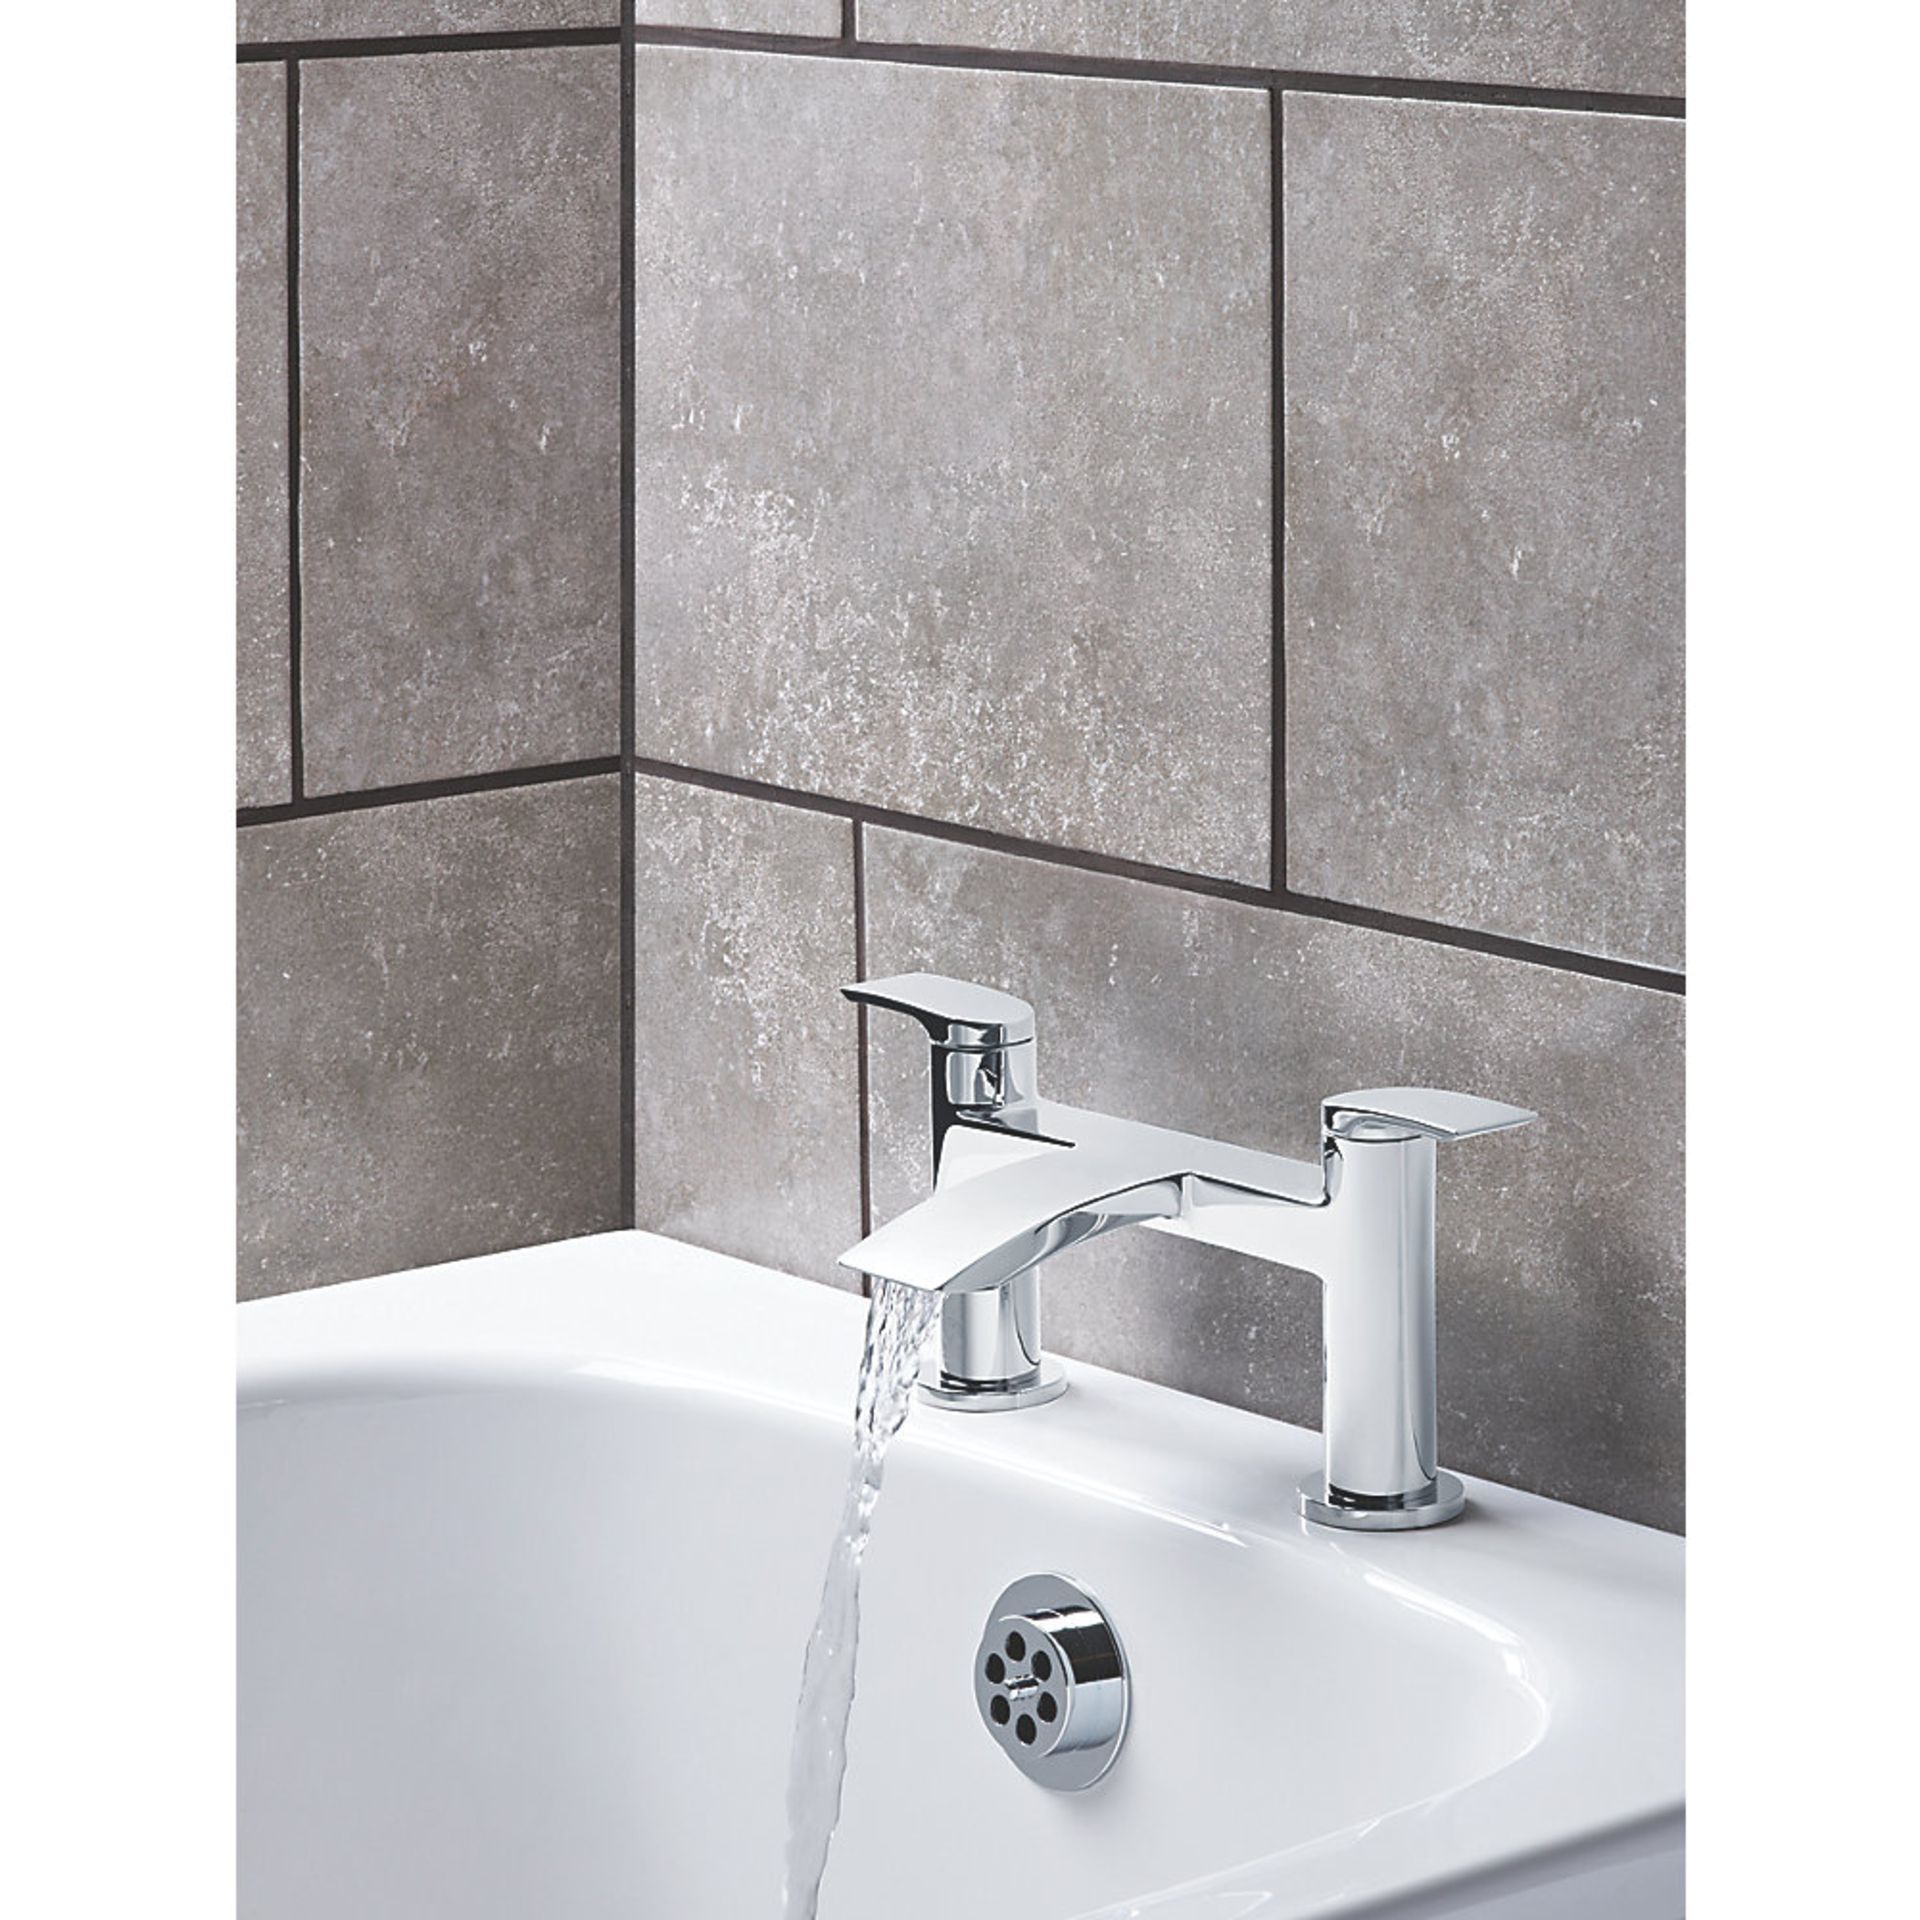 (PP194) Wye Bath Filler Tap. Bath mixer tap with solid brass body. Double Lever Operation Suitable